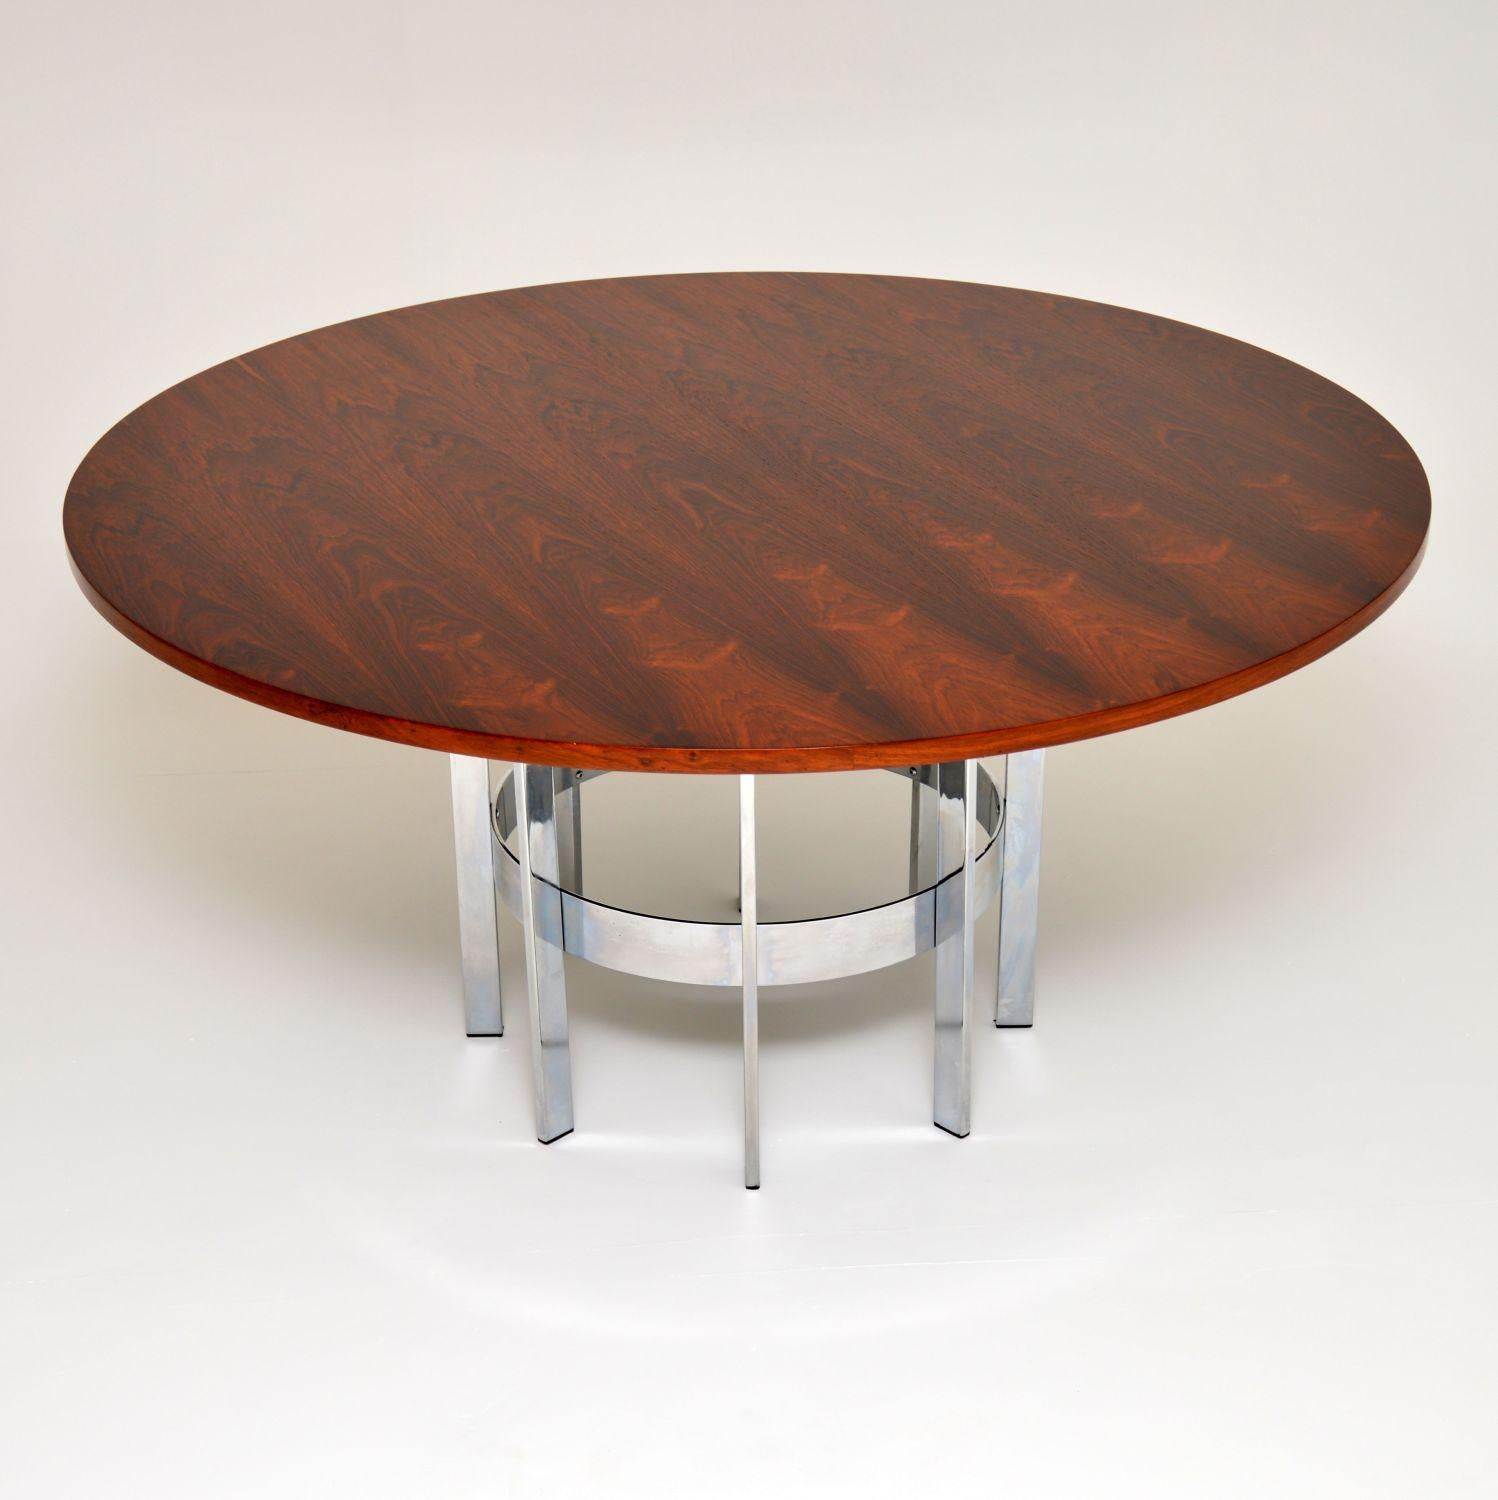 A beautiful and rare vintage dining table by Merrow Associates. It was designed by Richard Young, it was made in England and it dates from the 1960-70’s.

The large circular top sits on a gorgeous spoked chrome base. This can seat six comfortably